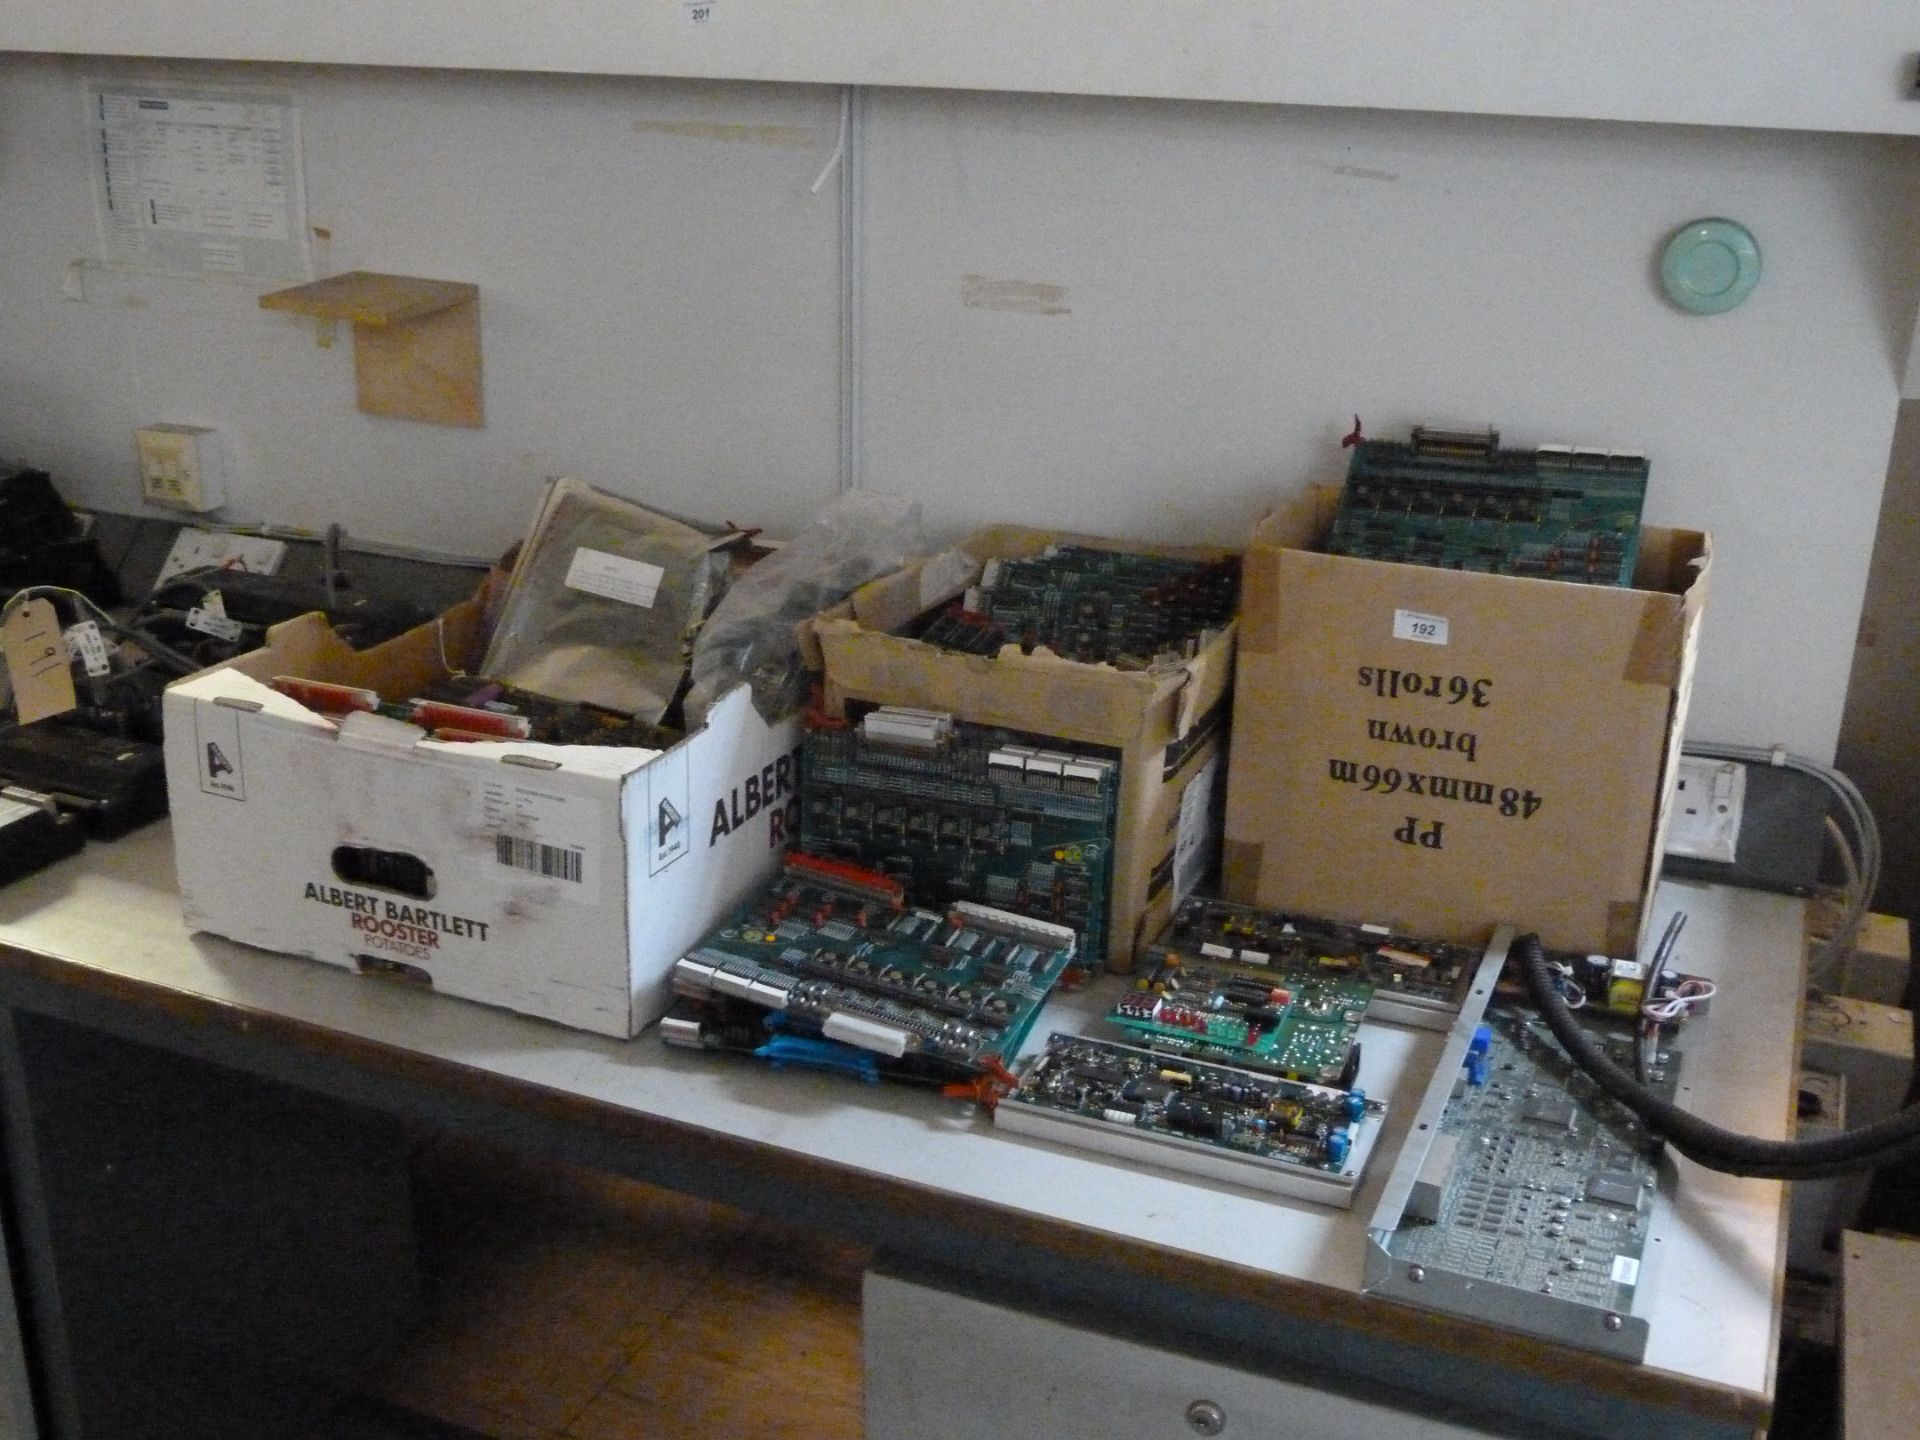 A large quantity of Harland Simon circuit boards